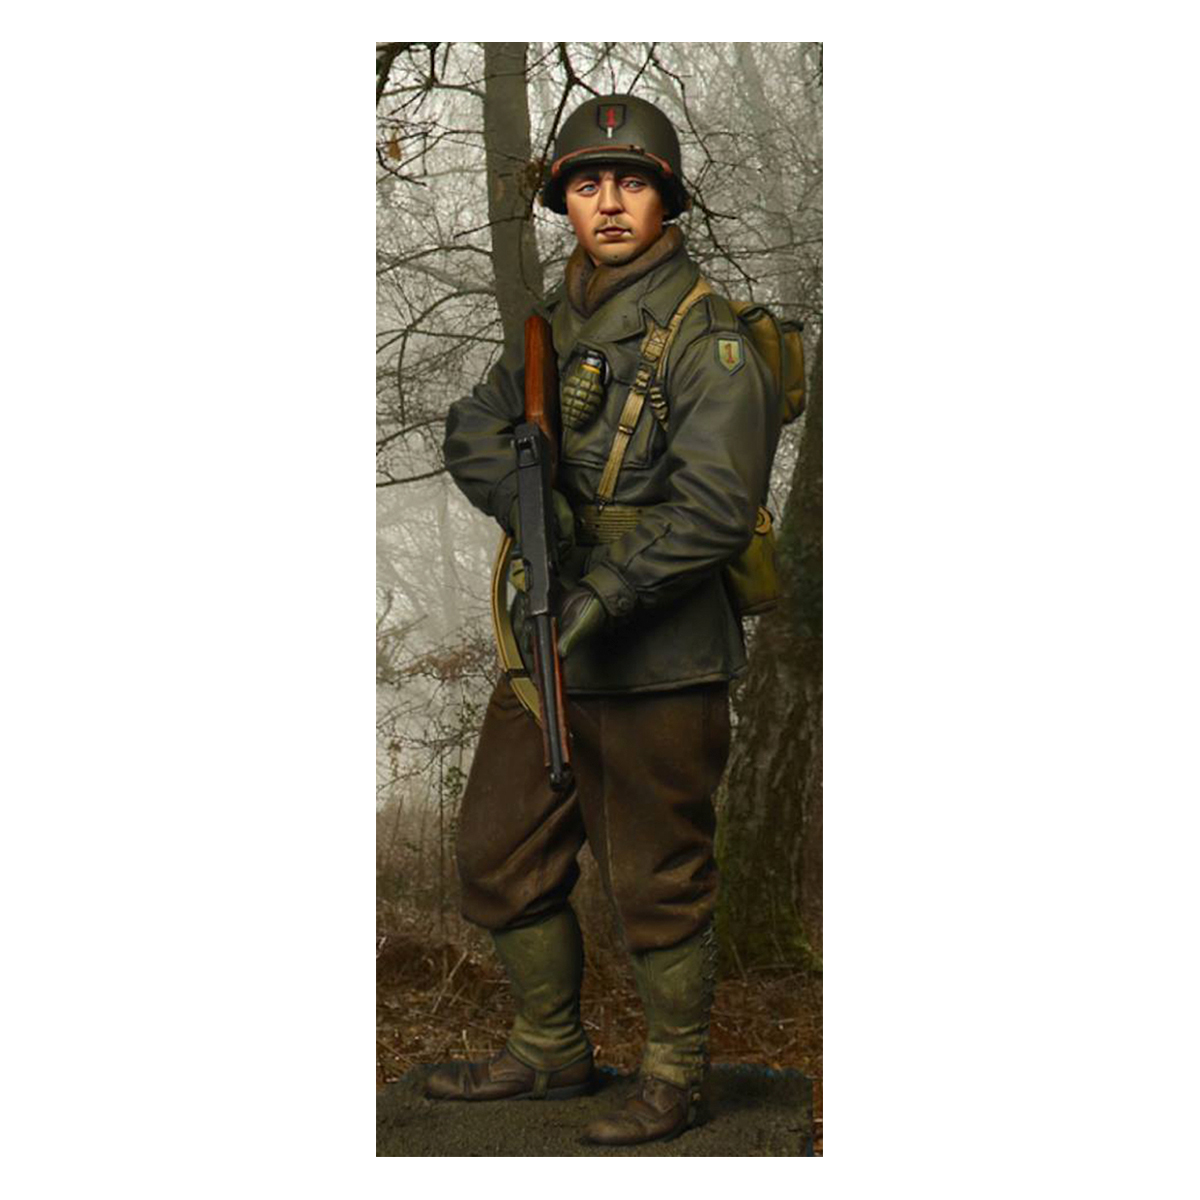 Alpine Miniatures – US 1st Infantry Division “The Big Red One” (1/16)